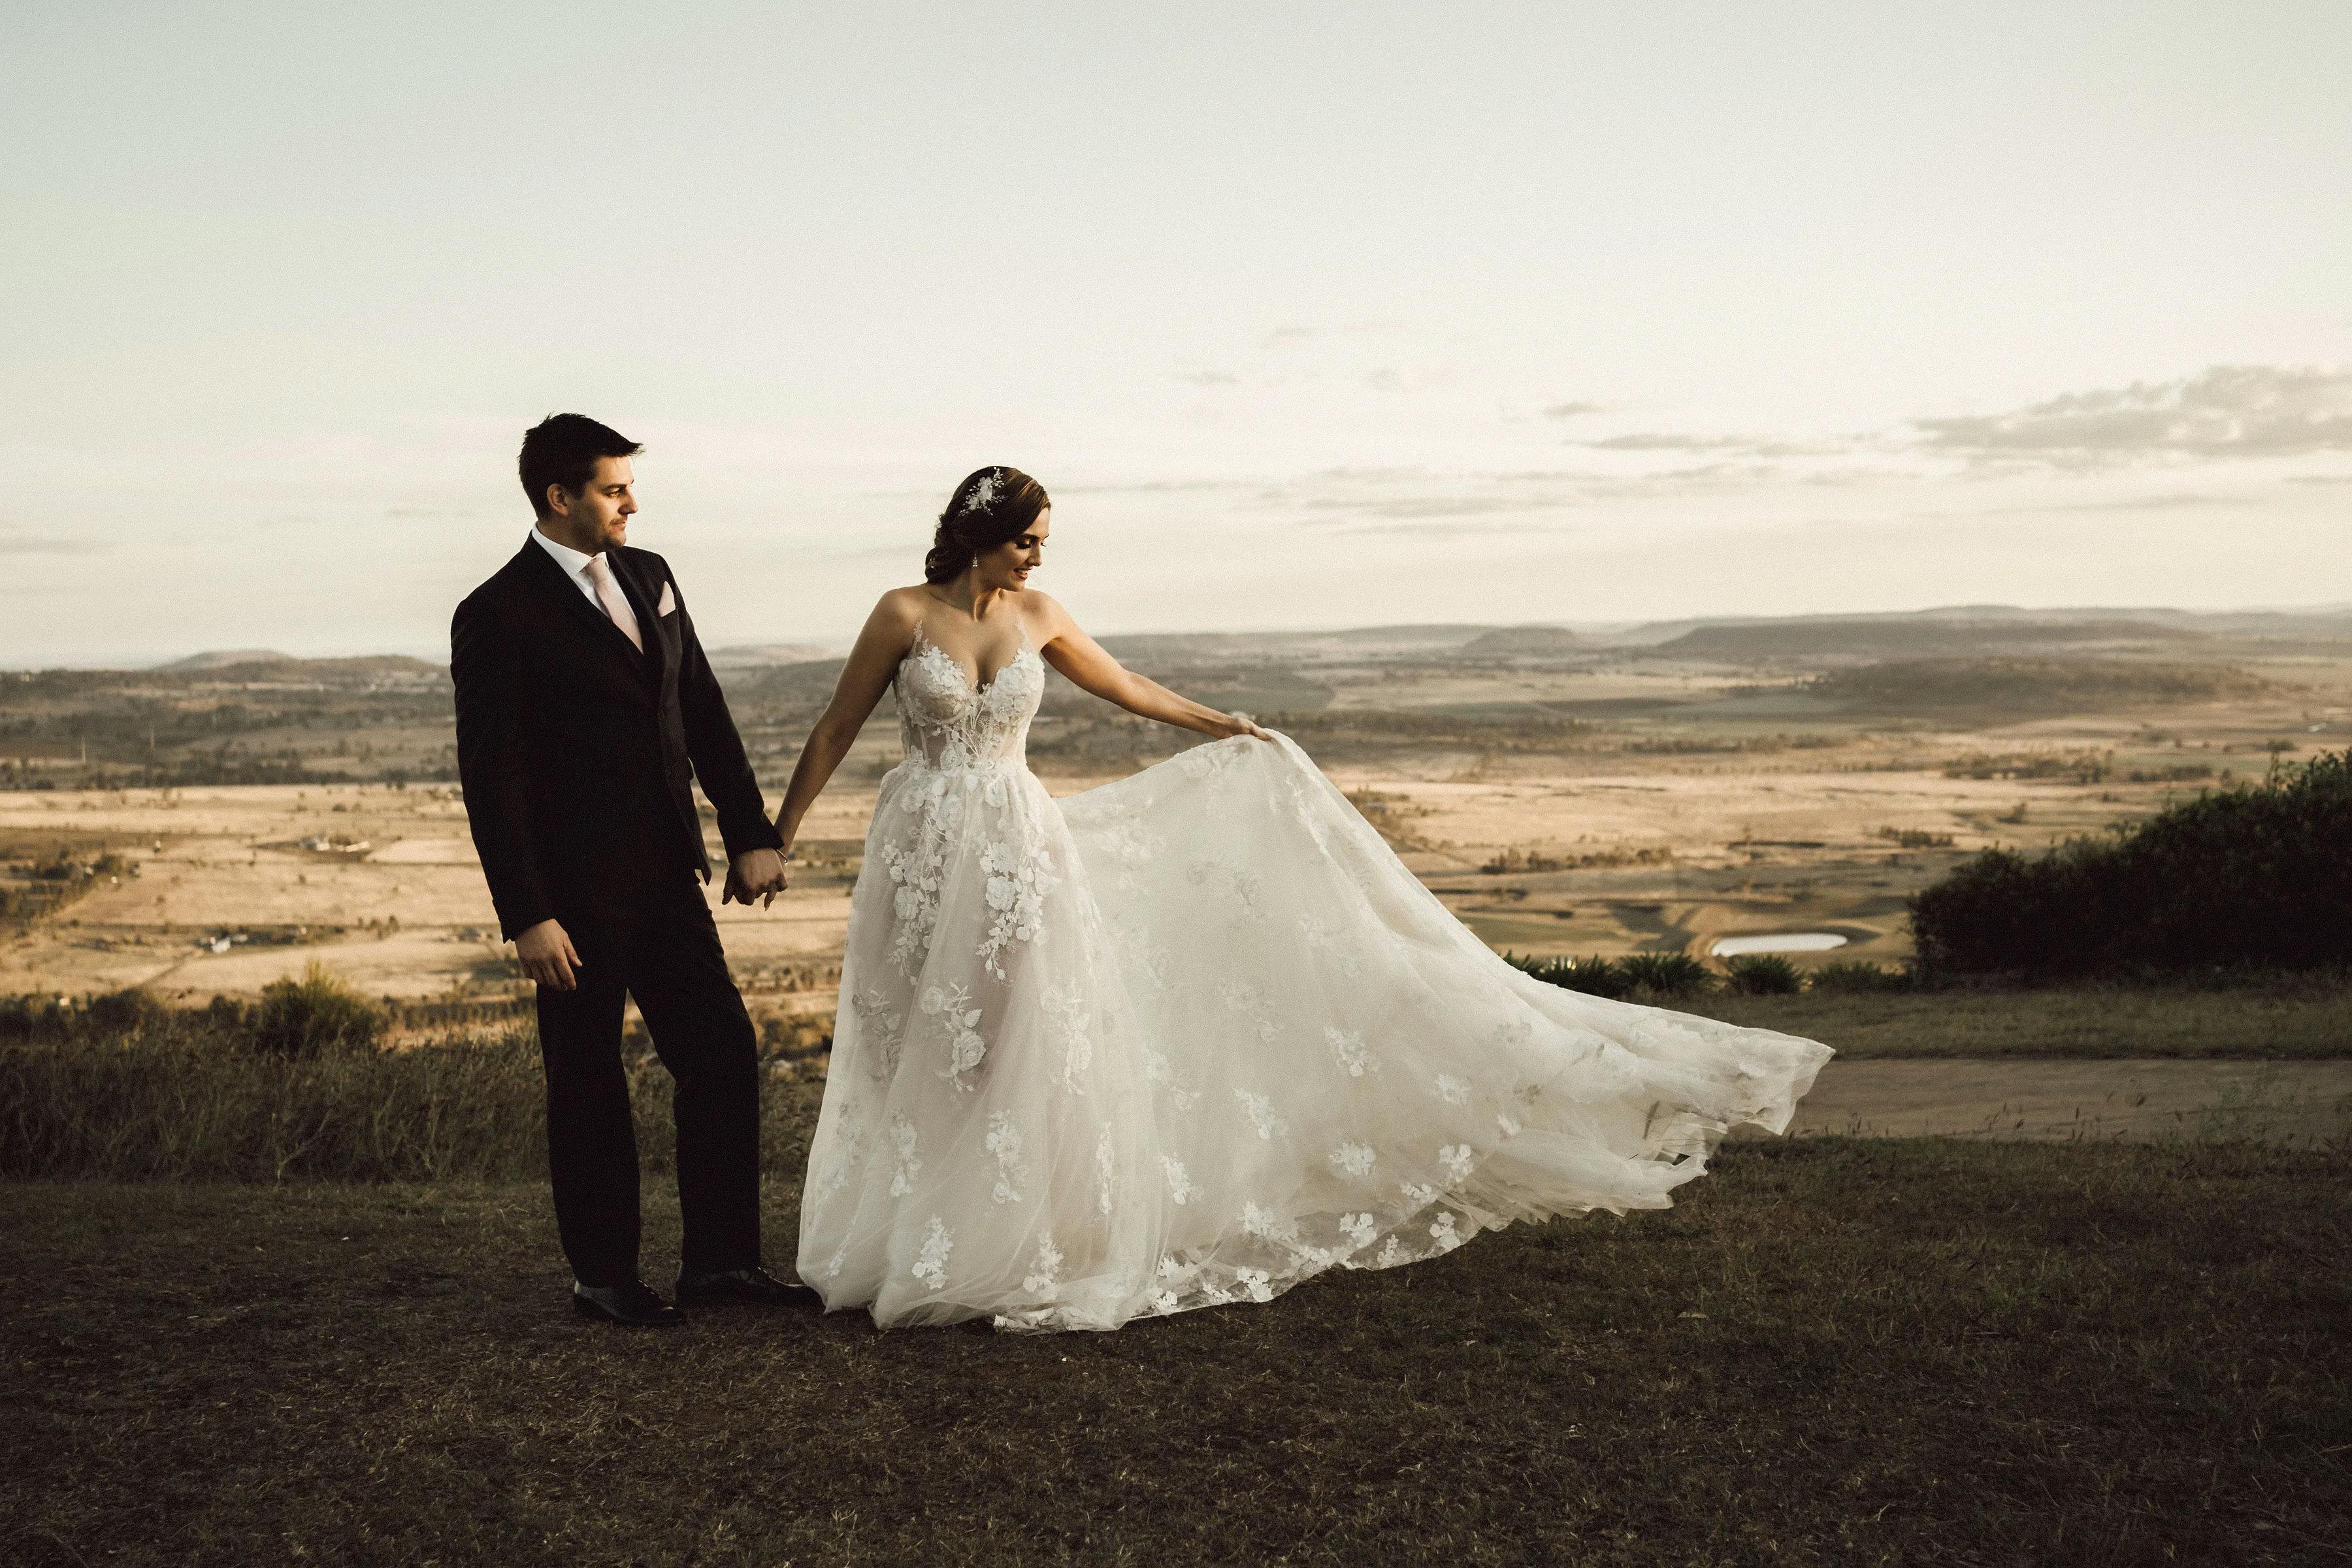 A bride and groom stand hand in hand on a grassy hilltop at sunset. The bride is wearing a white strapless gown with lace details and is holding the skirt of her dress. The groom is dressed in a dark suit and tie. The background shows a panoramic view of fields and hills.